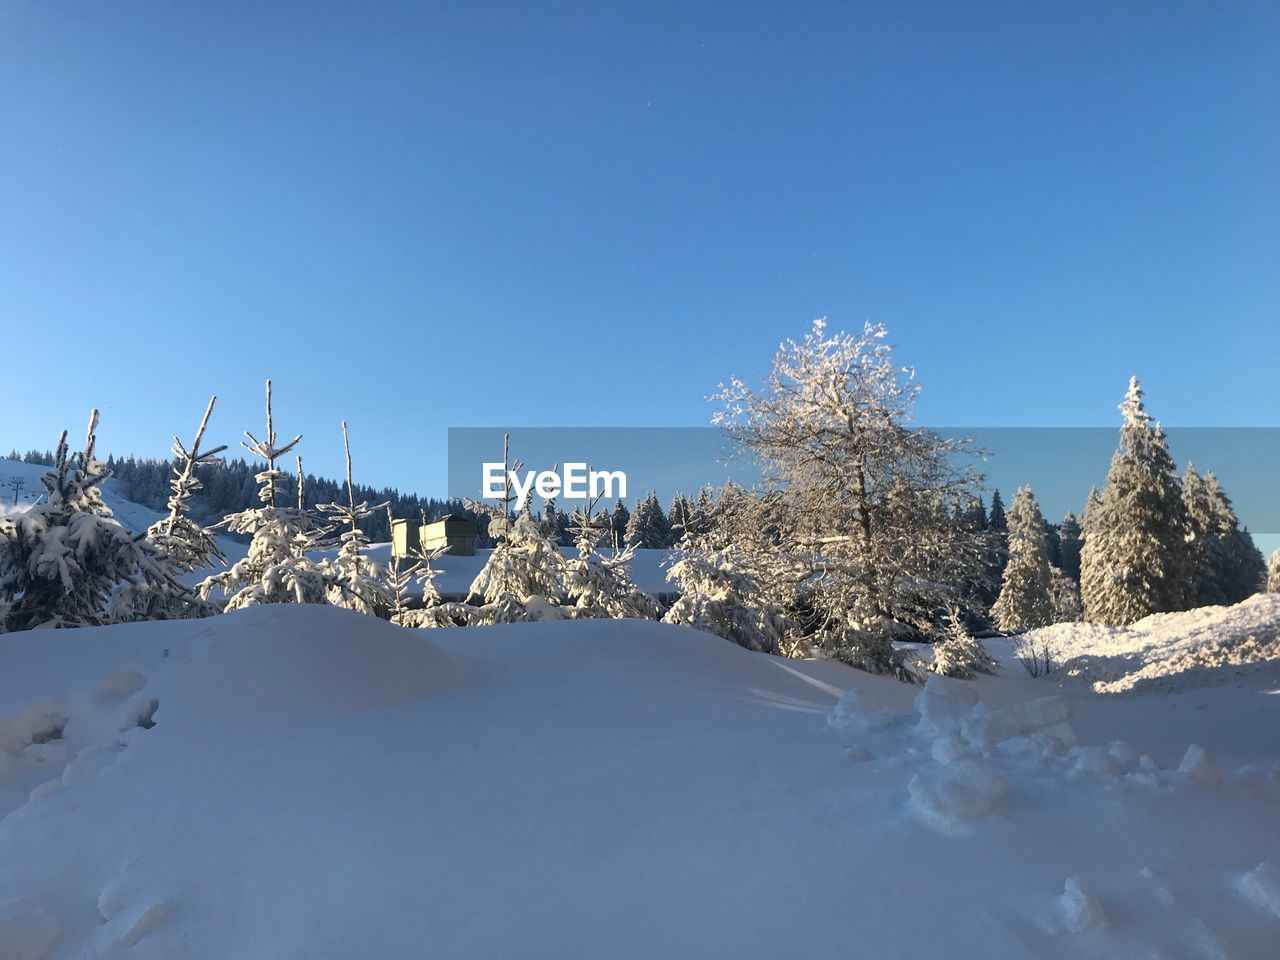 PANORAMIC VIEW OF TREES ON SNOW COVERED LANDSCAPE AGAINST CLEAR BLUE SKY